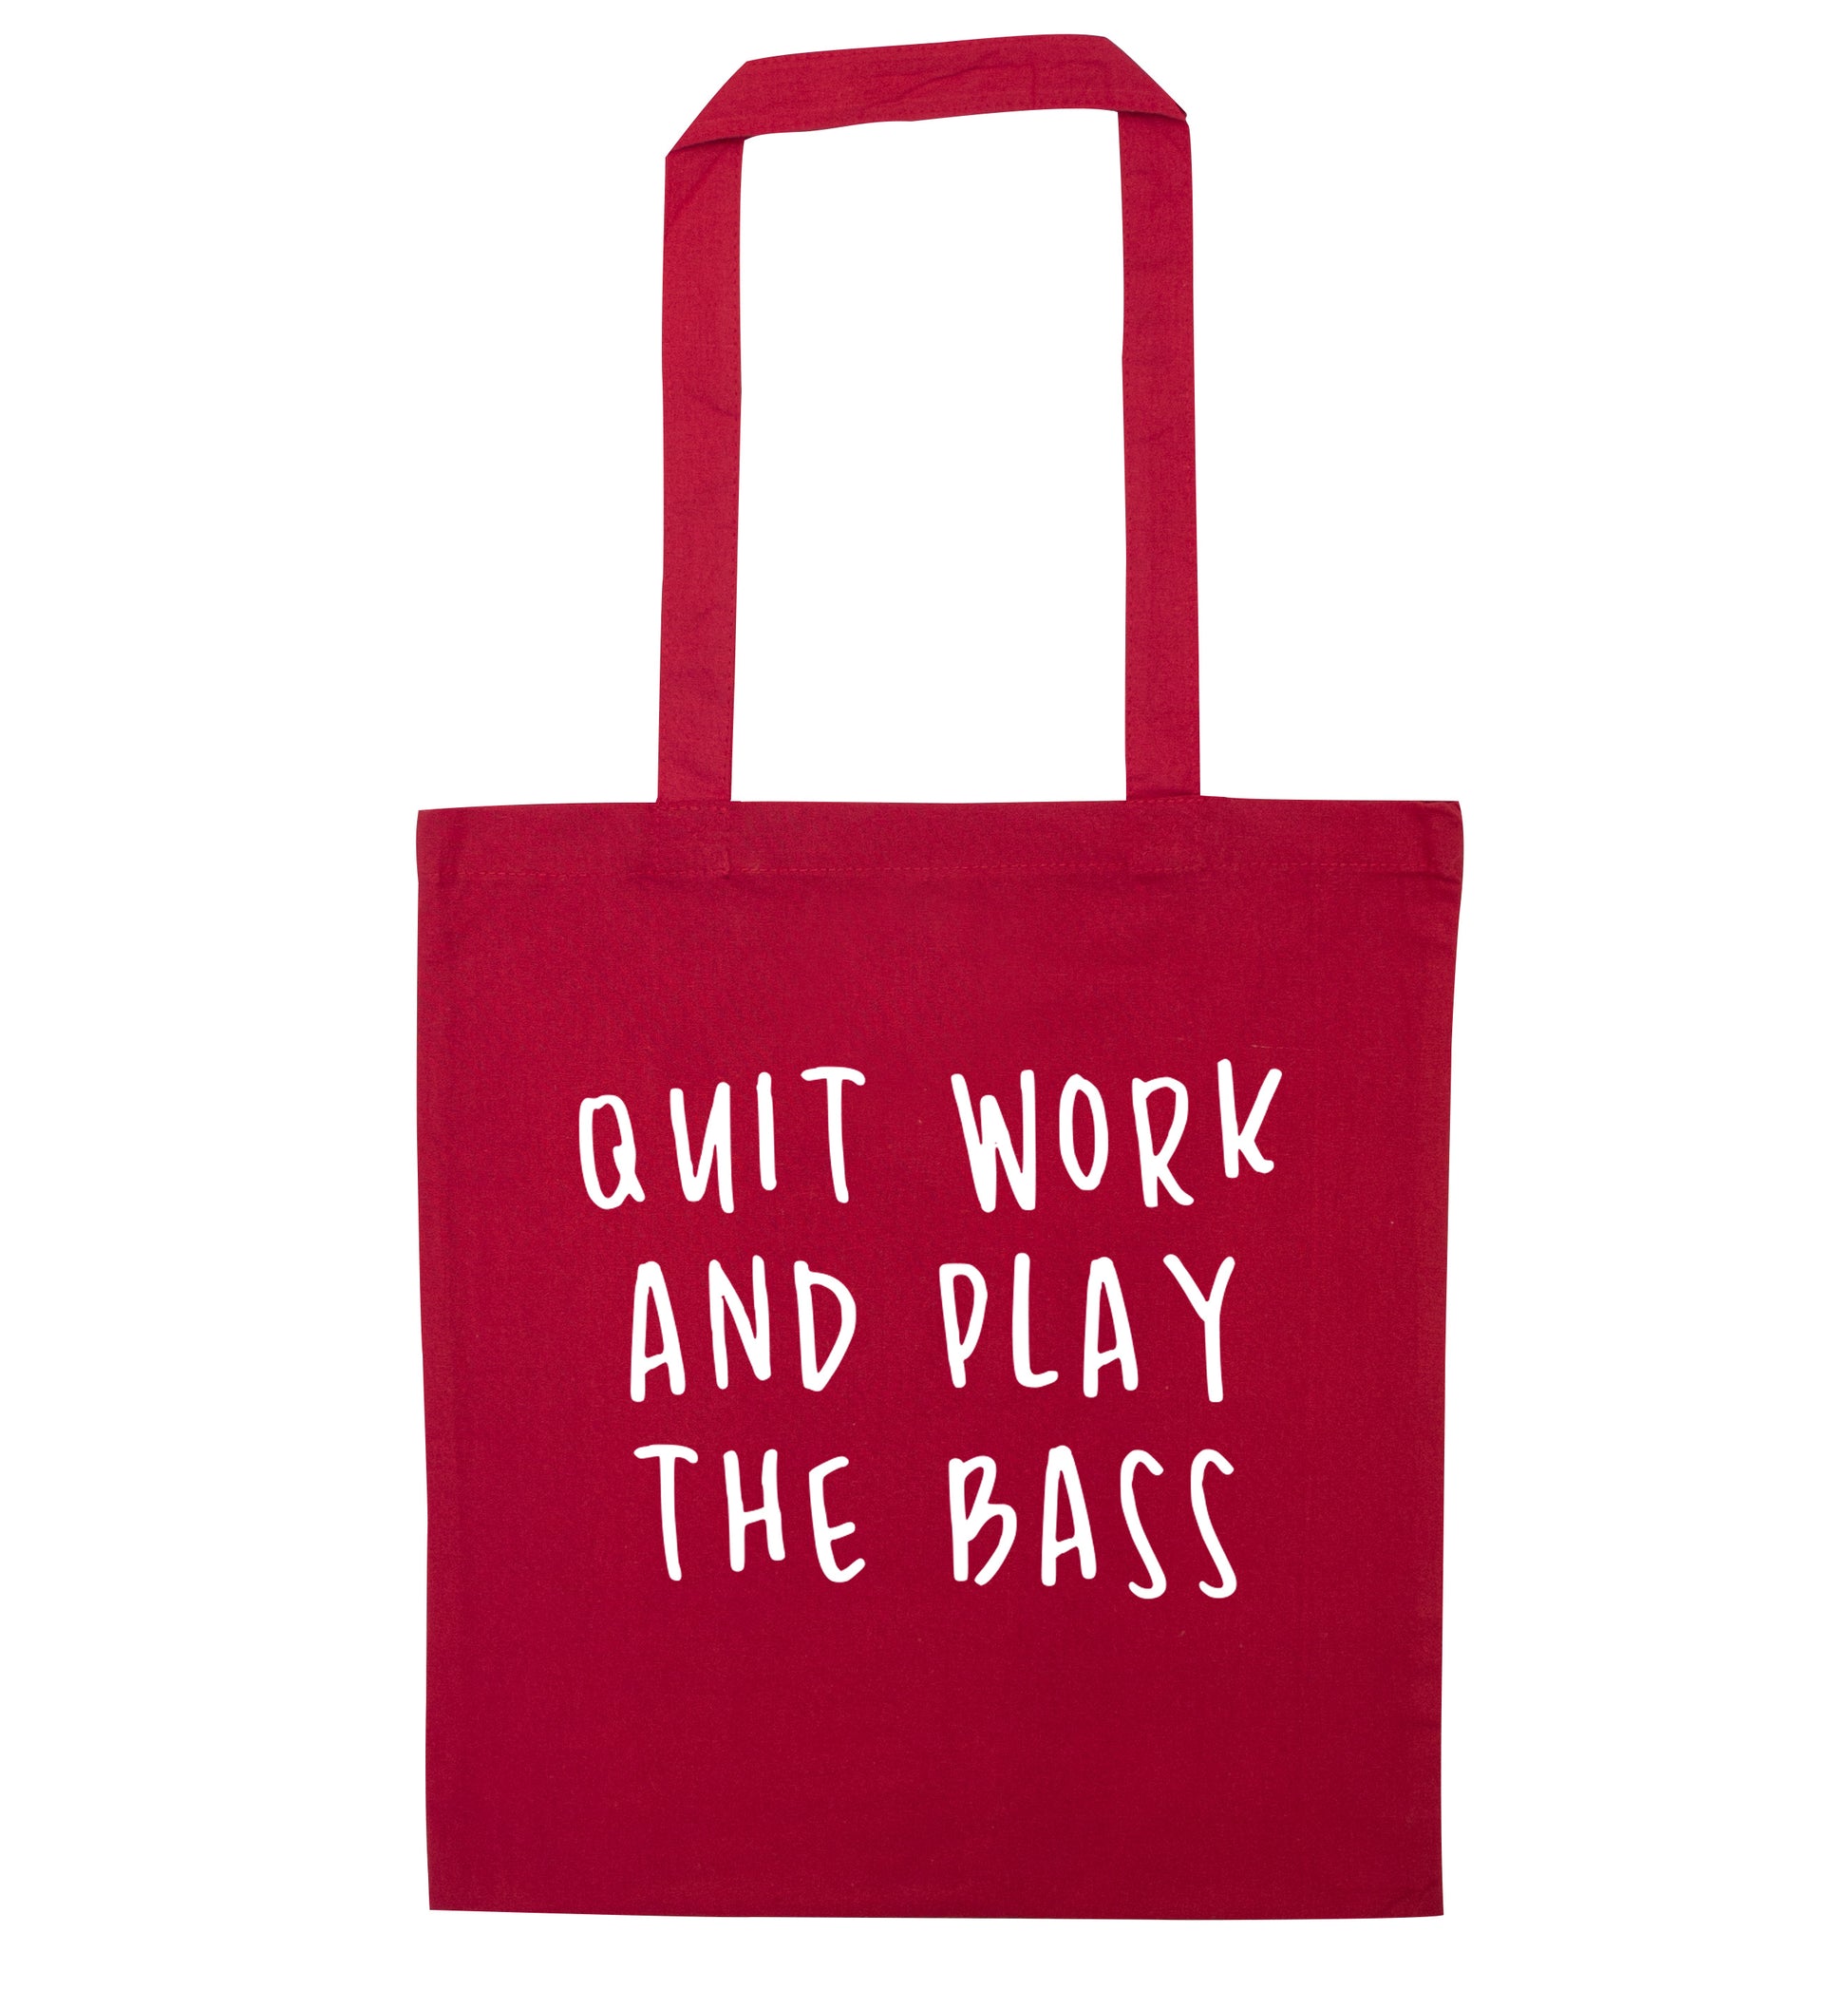 Quit work and play the bass red tote bag